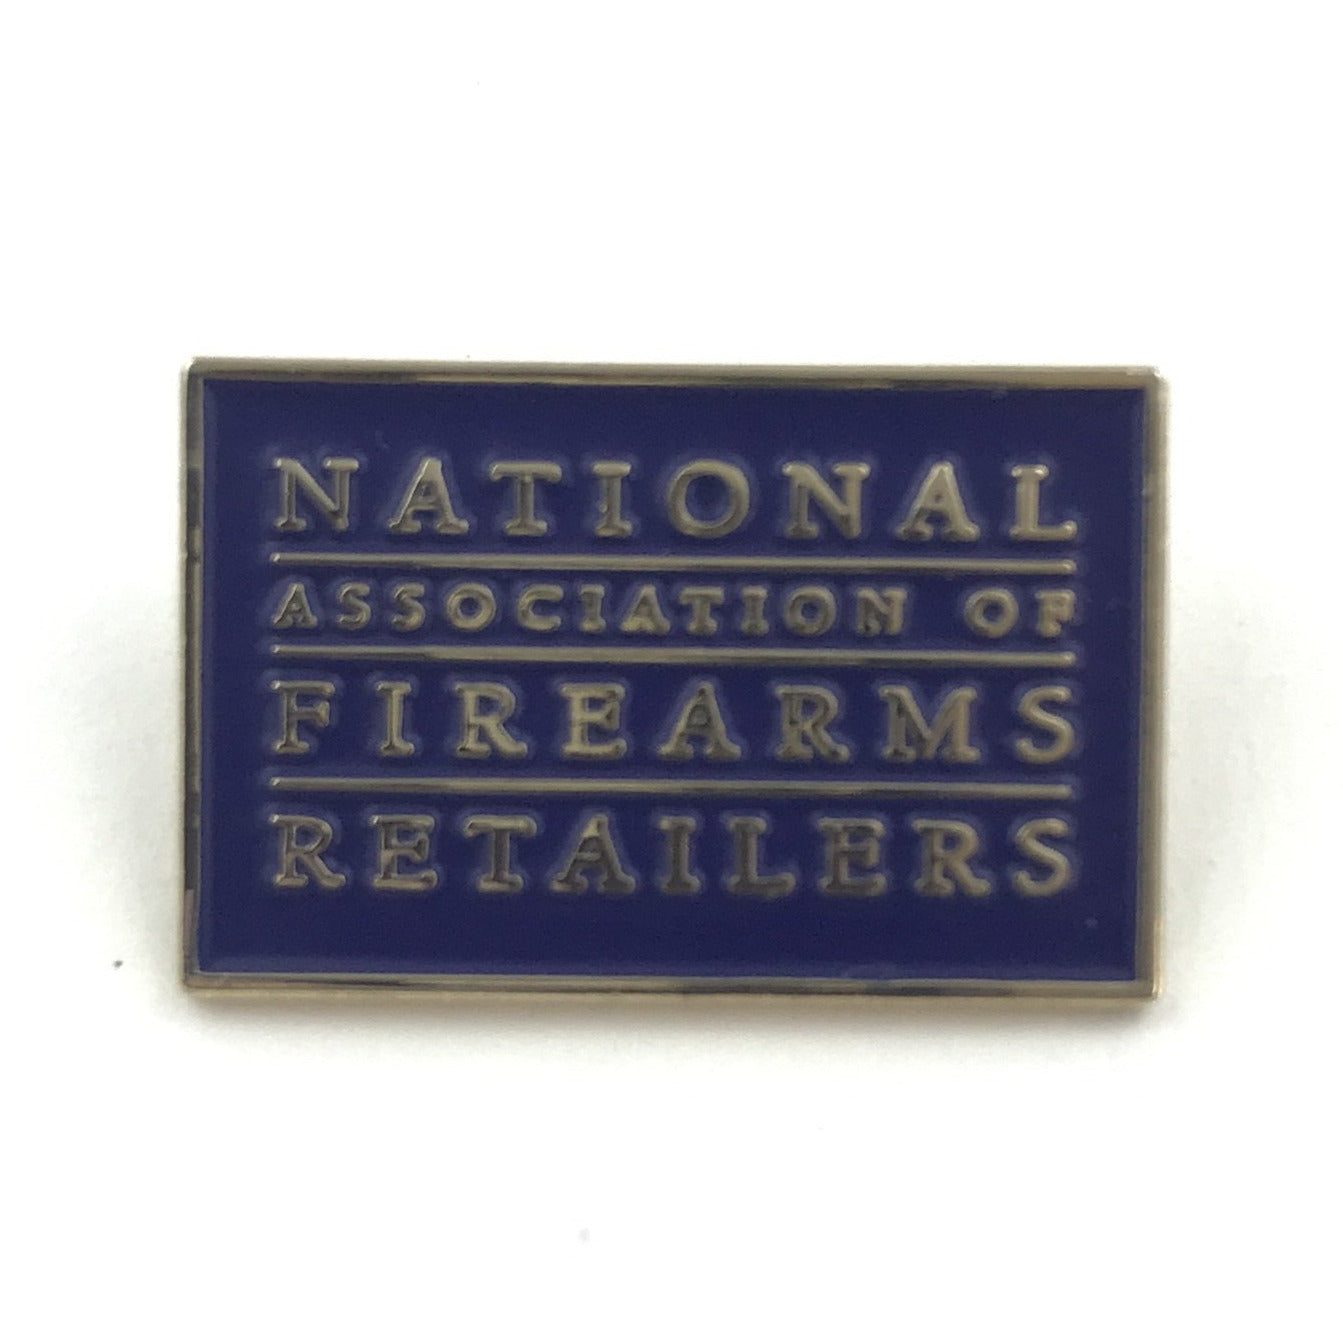 National Association Of Firearms Retailers Lapel Pin